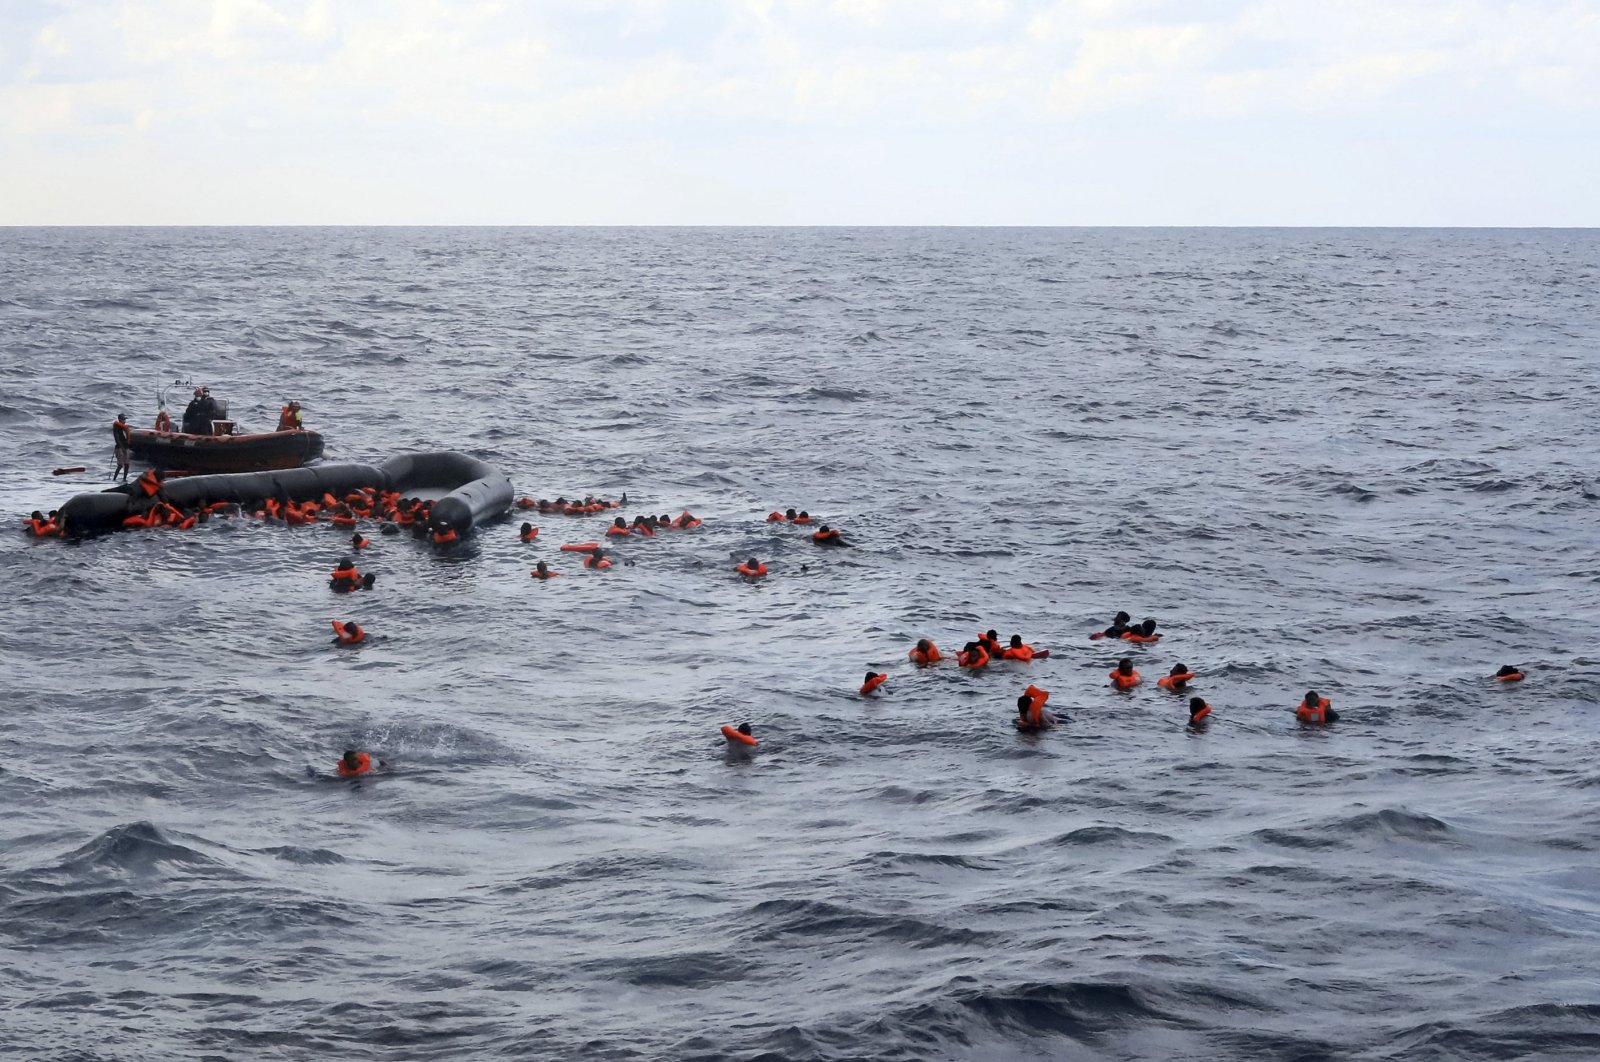 Refugees and migrants are rescued by members of the Spanish NGO Proactiva Open Arms, after leaving Libya trying to reach European soil aboard an overcrowded rubber boat in the Mediterranean sea, Wednesday, Nov. 11, 2020. (AP File Photo)